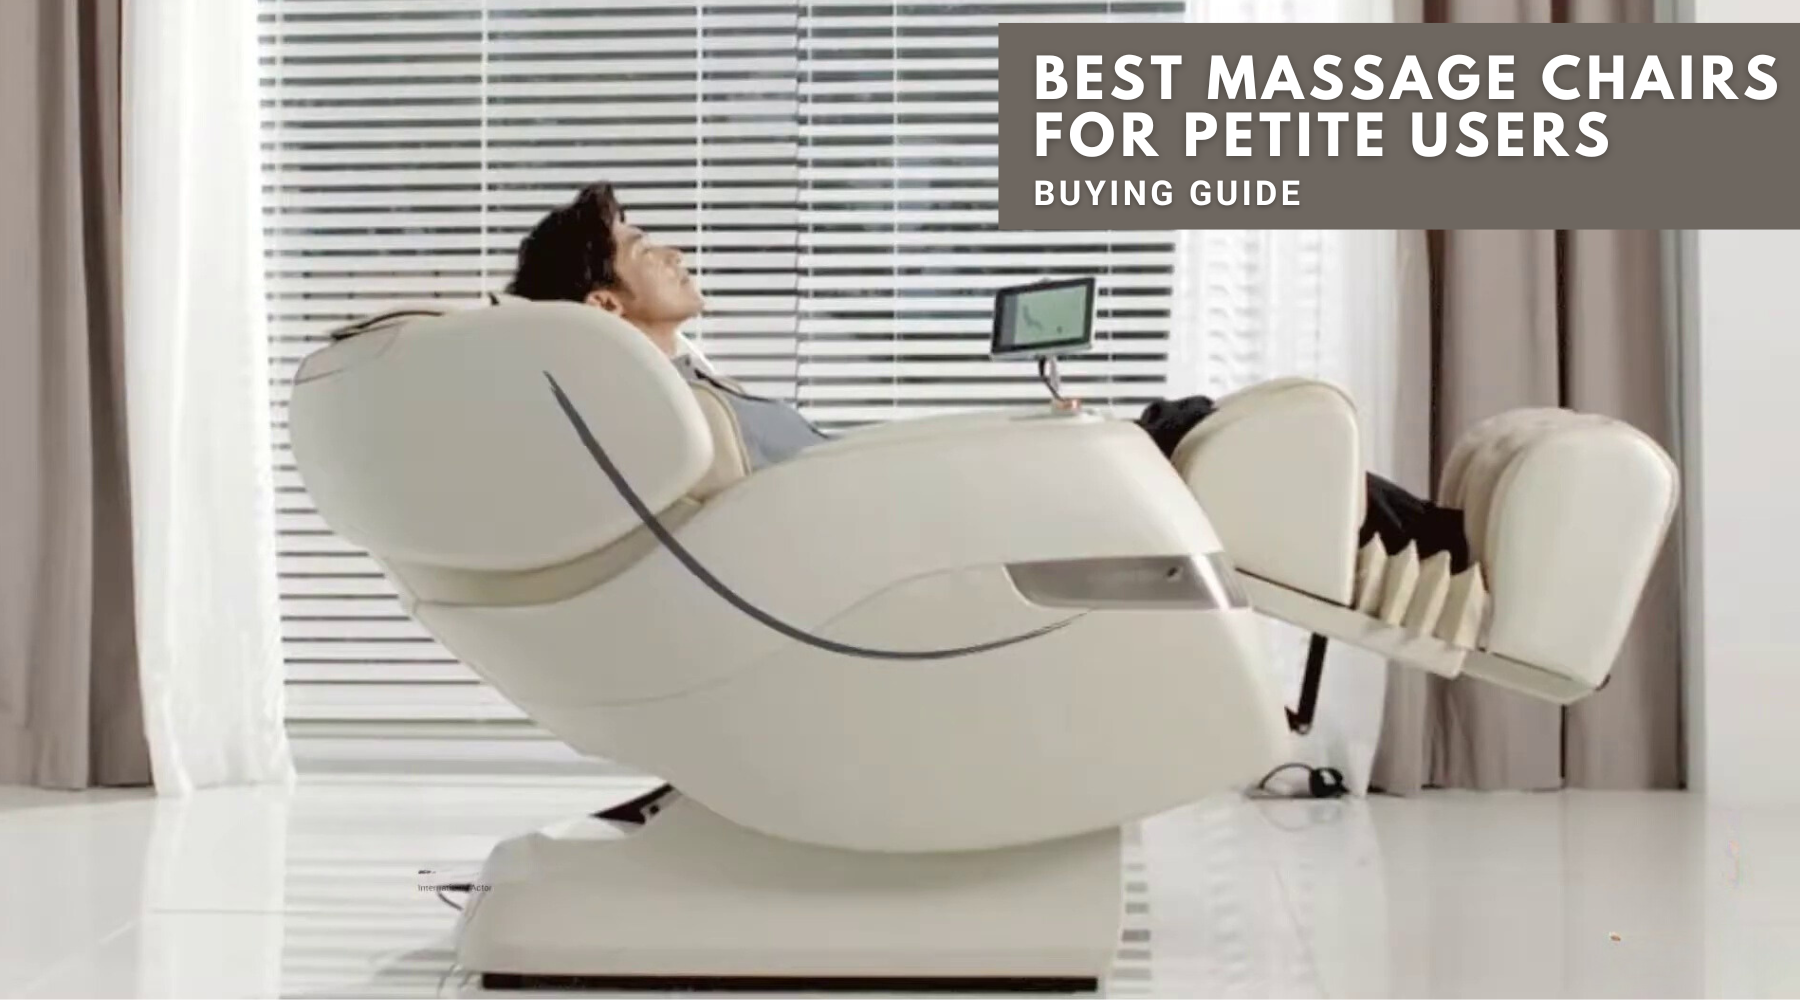 If you have a petite frame and stature, the bigger massage chairs won't be a good fit So, it’s important to try before you buy. 